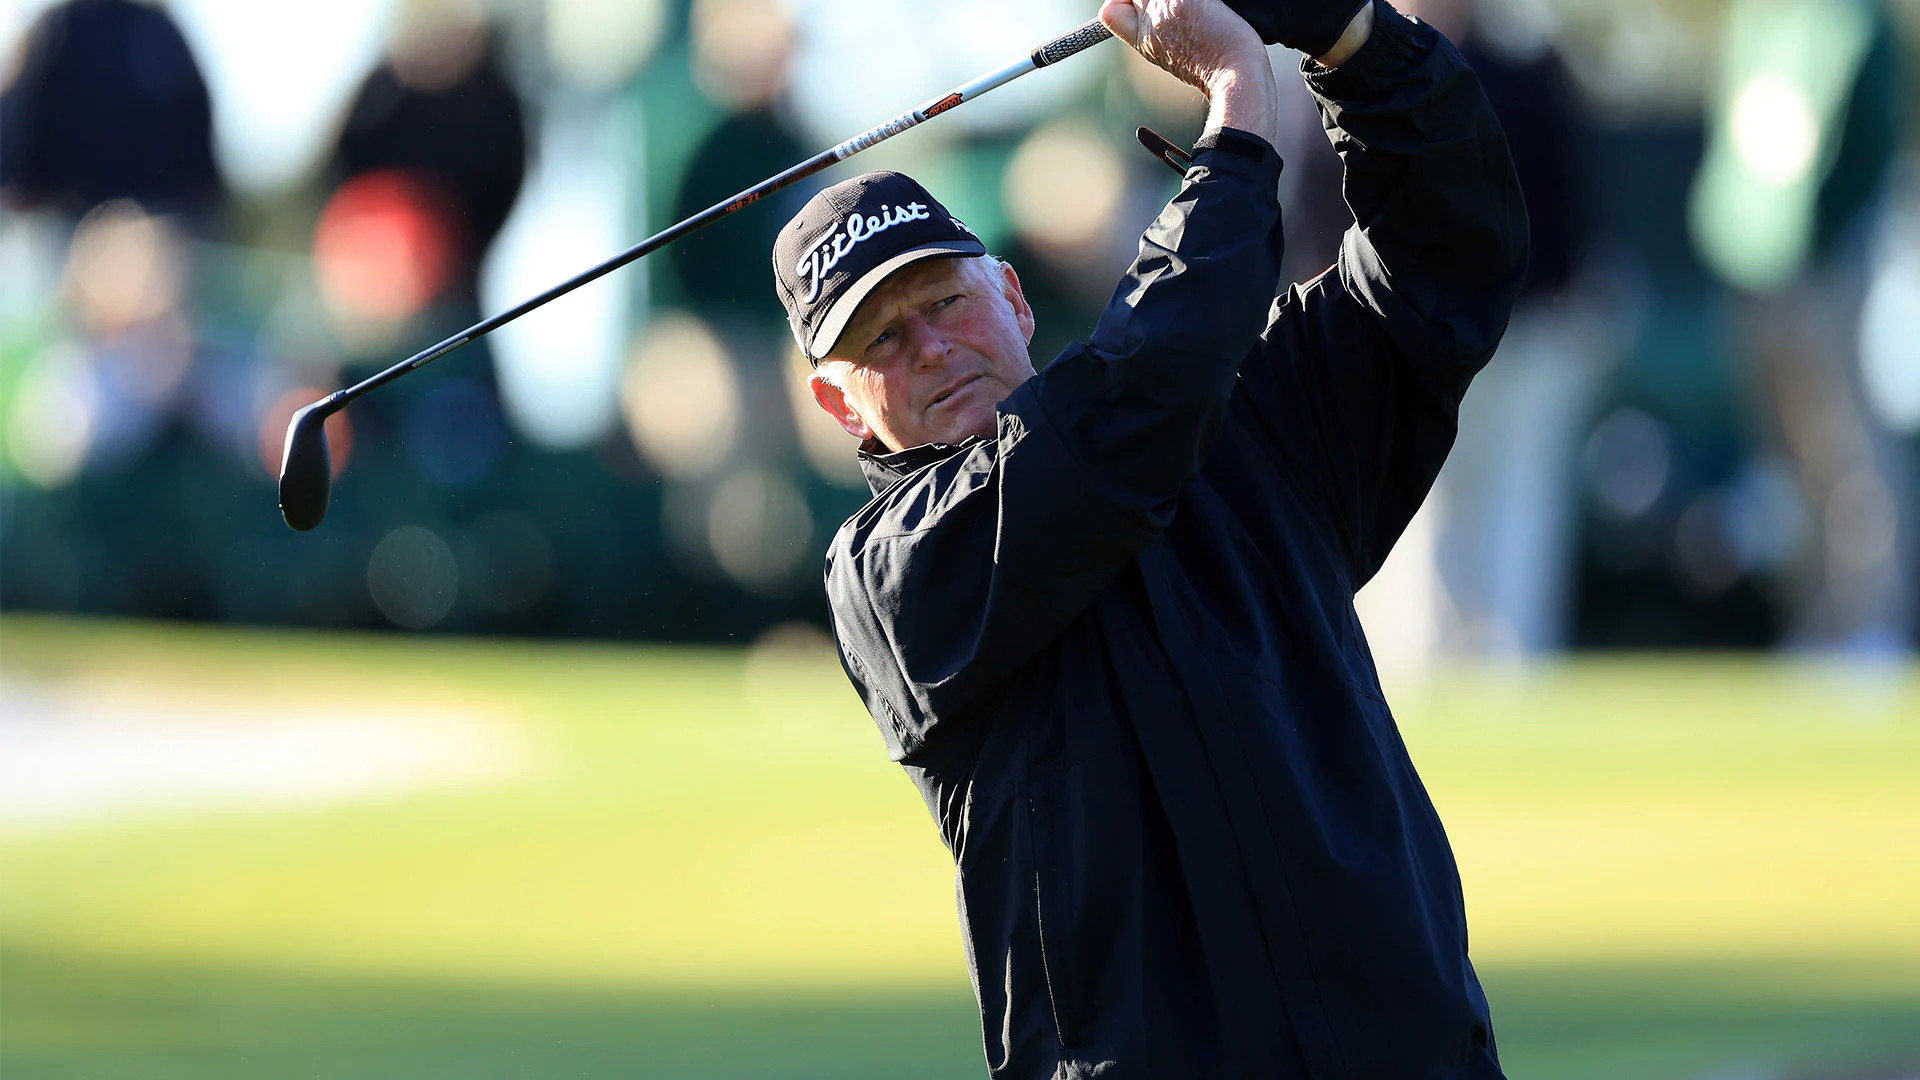 Sandy Lyle likely fading to black at next year’s Masters Tournament